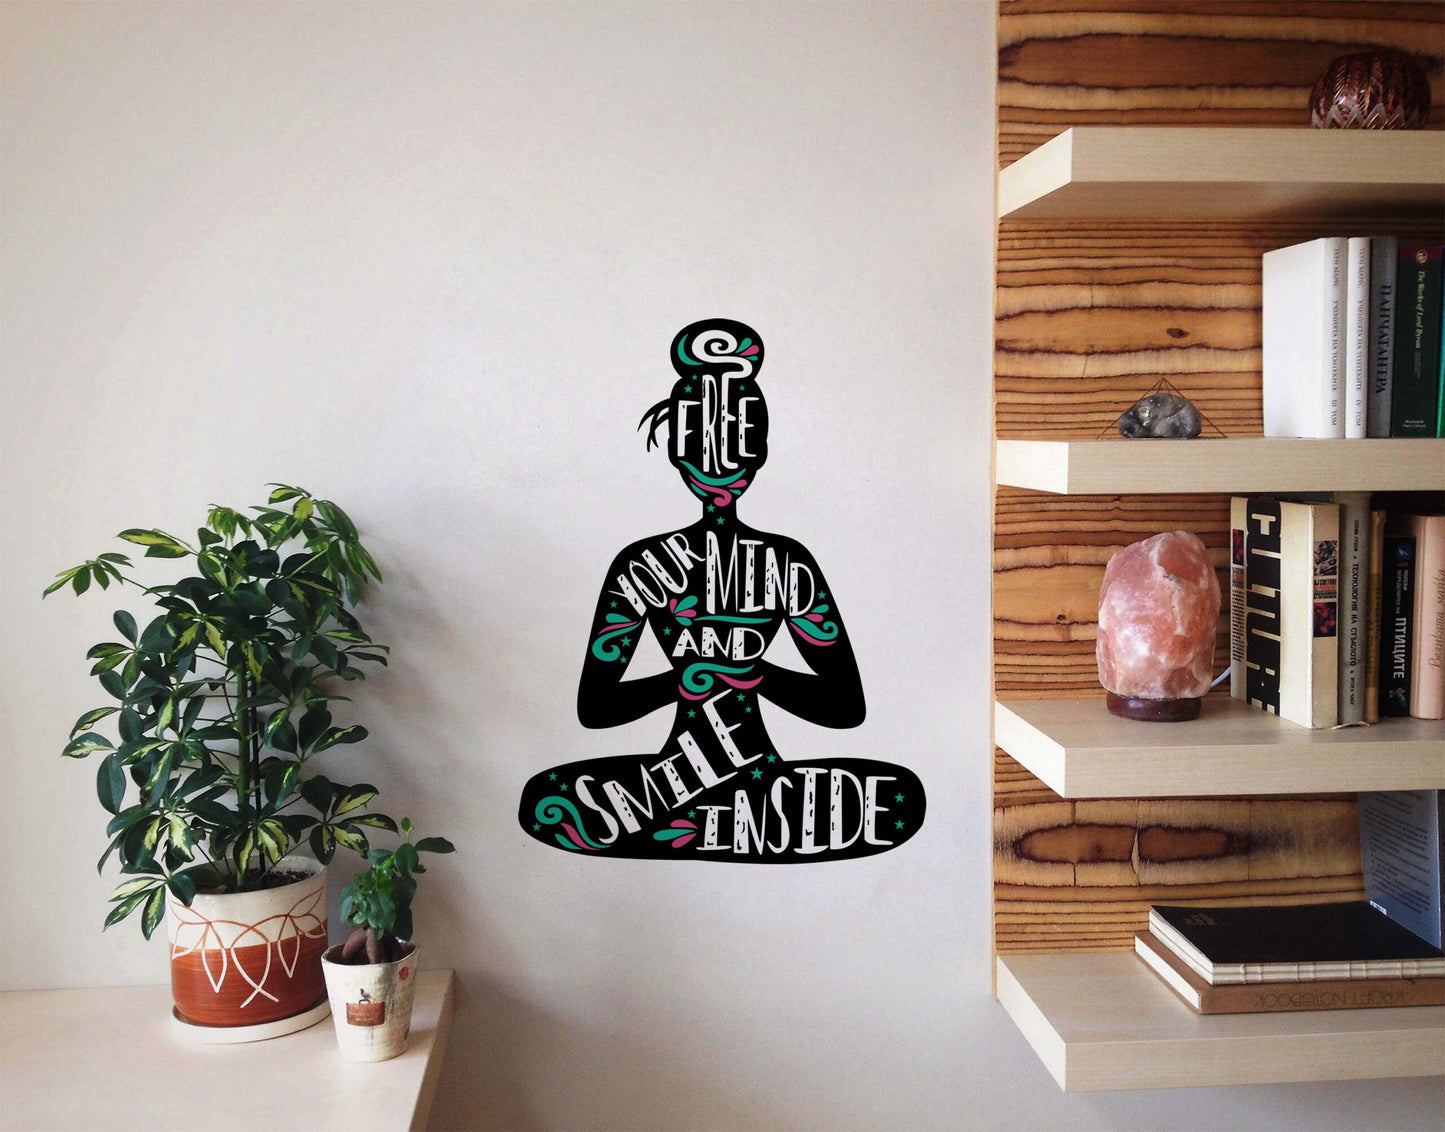 Free Your Mind and Smile Inside yoga sticker